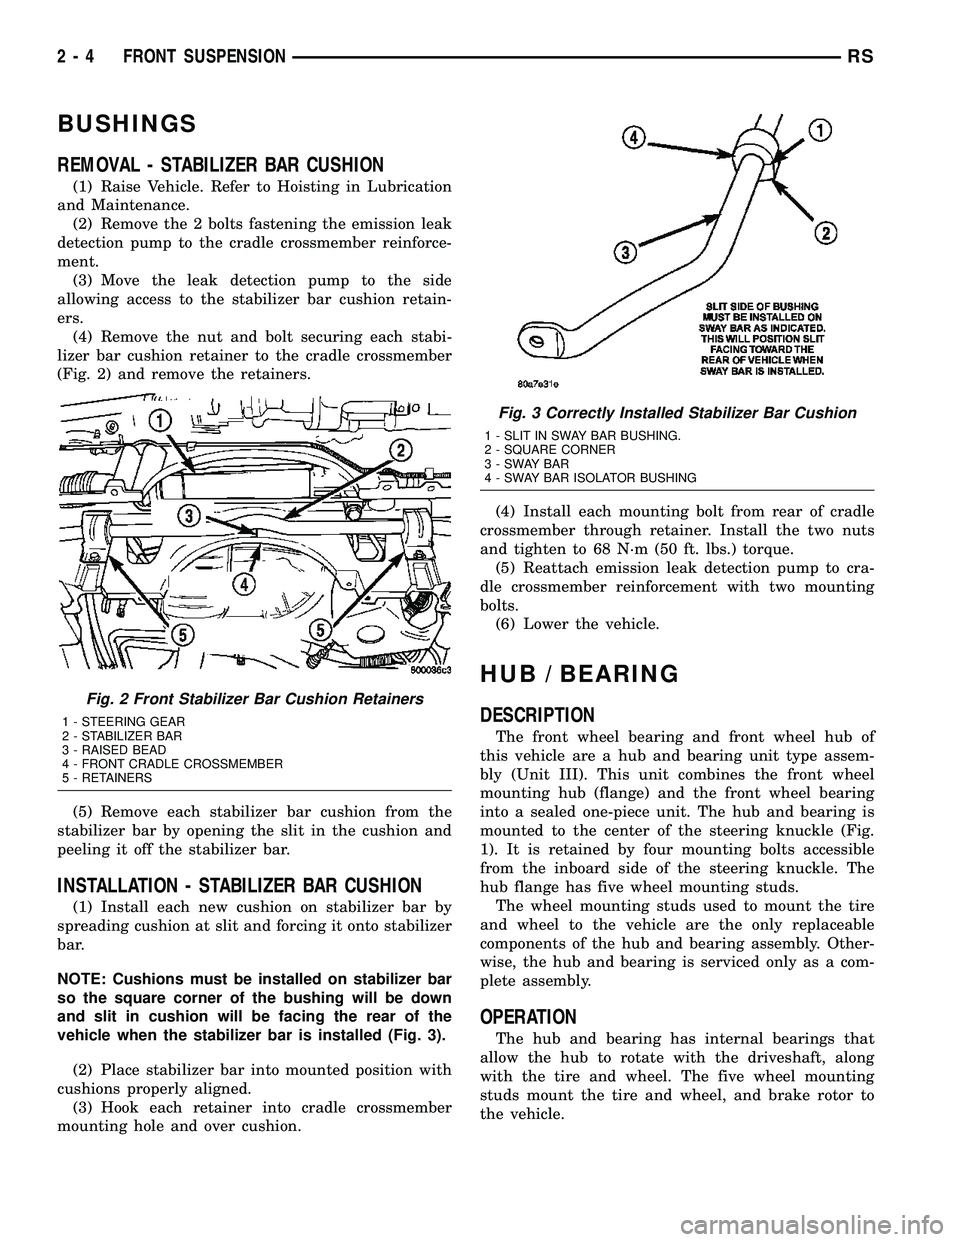 DODGE TOWN AND COUNTRY 2004 Workshop Manual BUSHINGS
REMOVAL - STABILIZER BAR CUSHION
(1) Raise Vehicle. Refer to Hoisting in Lubrication
and Maintenance.
(2) Remove the 2 bolts fastening the emission leak
detection pump to the cradle crossmemb